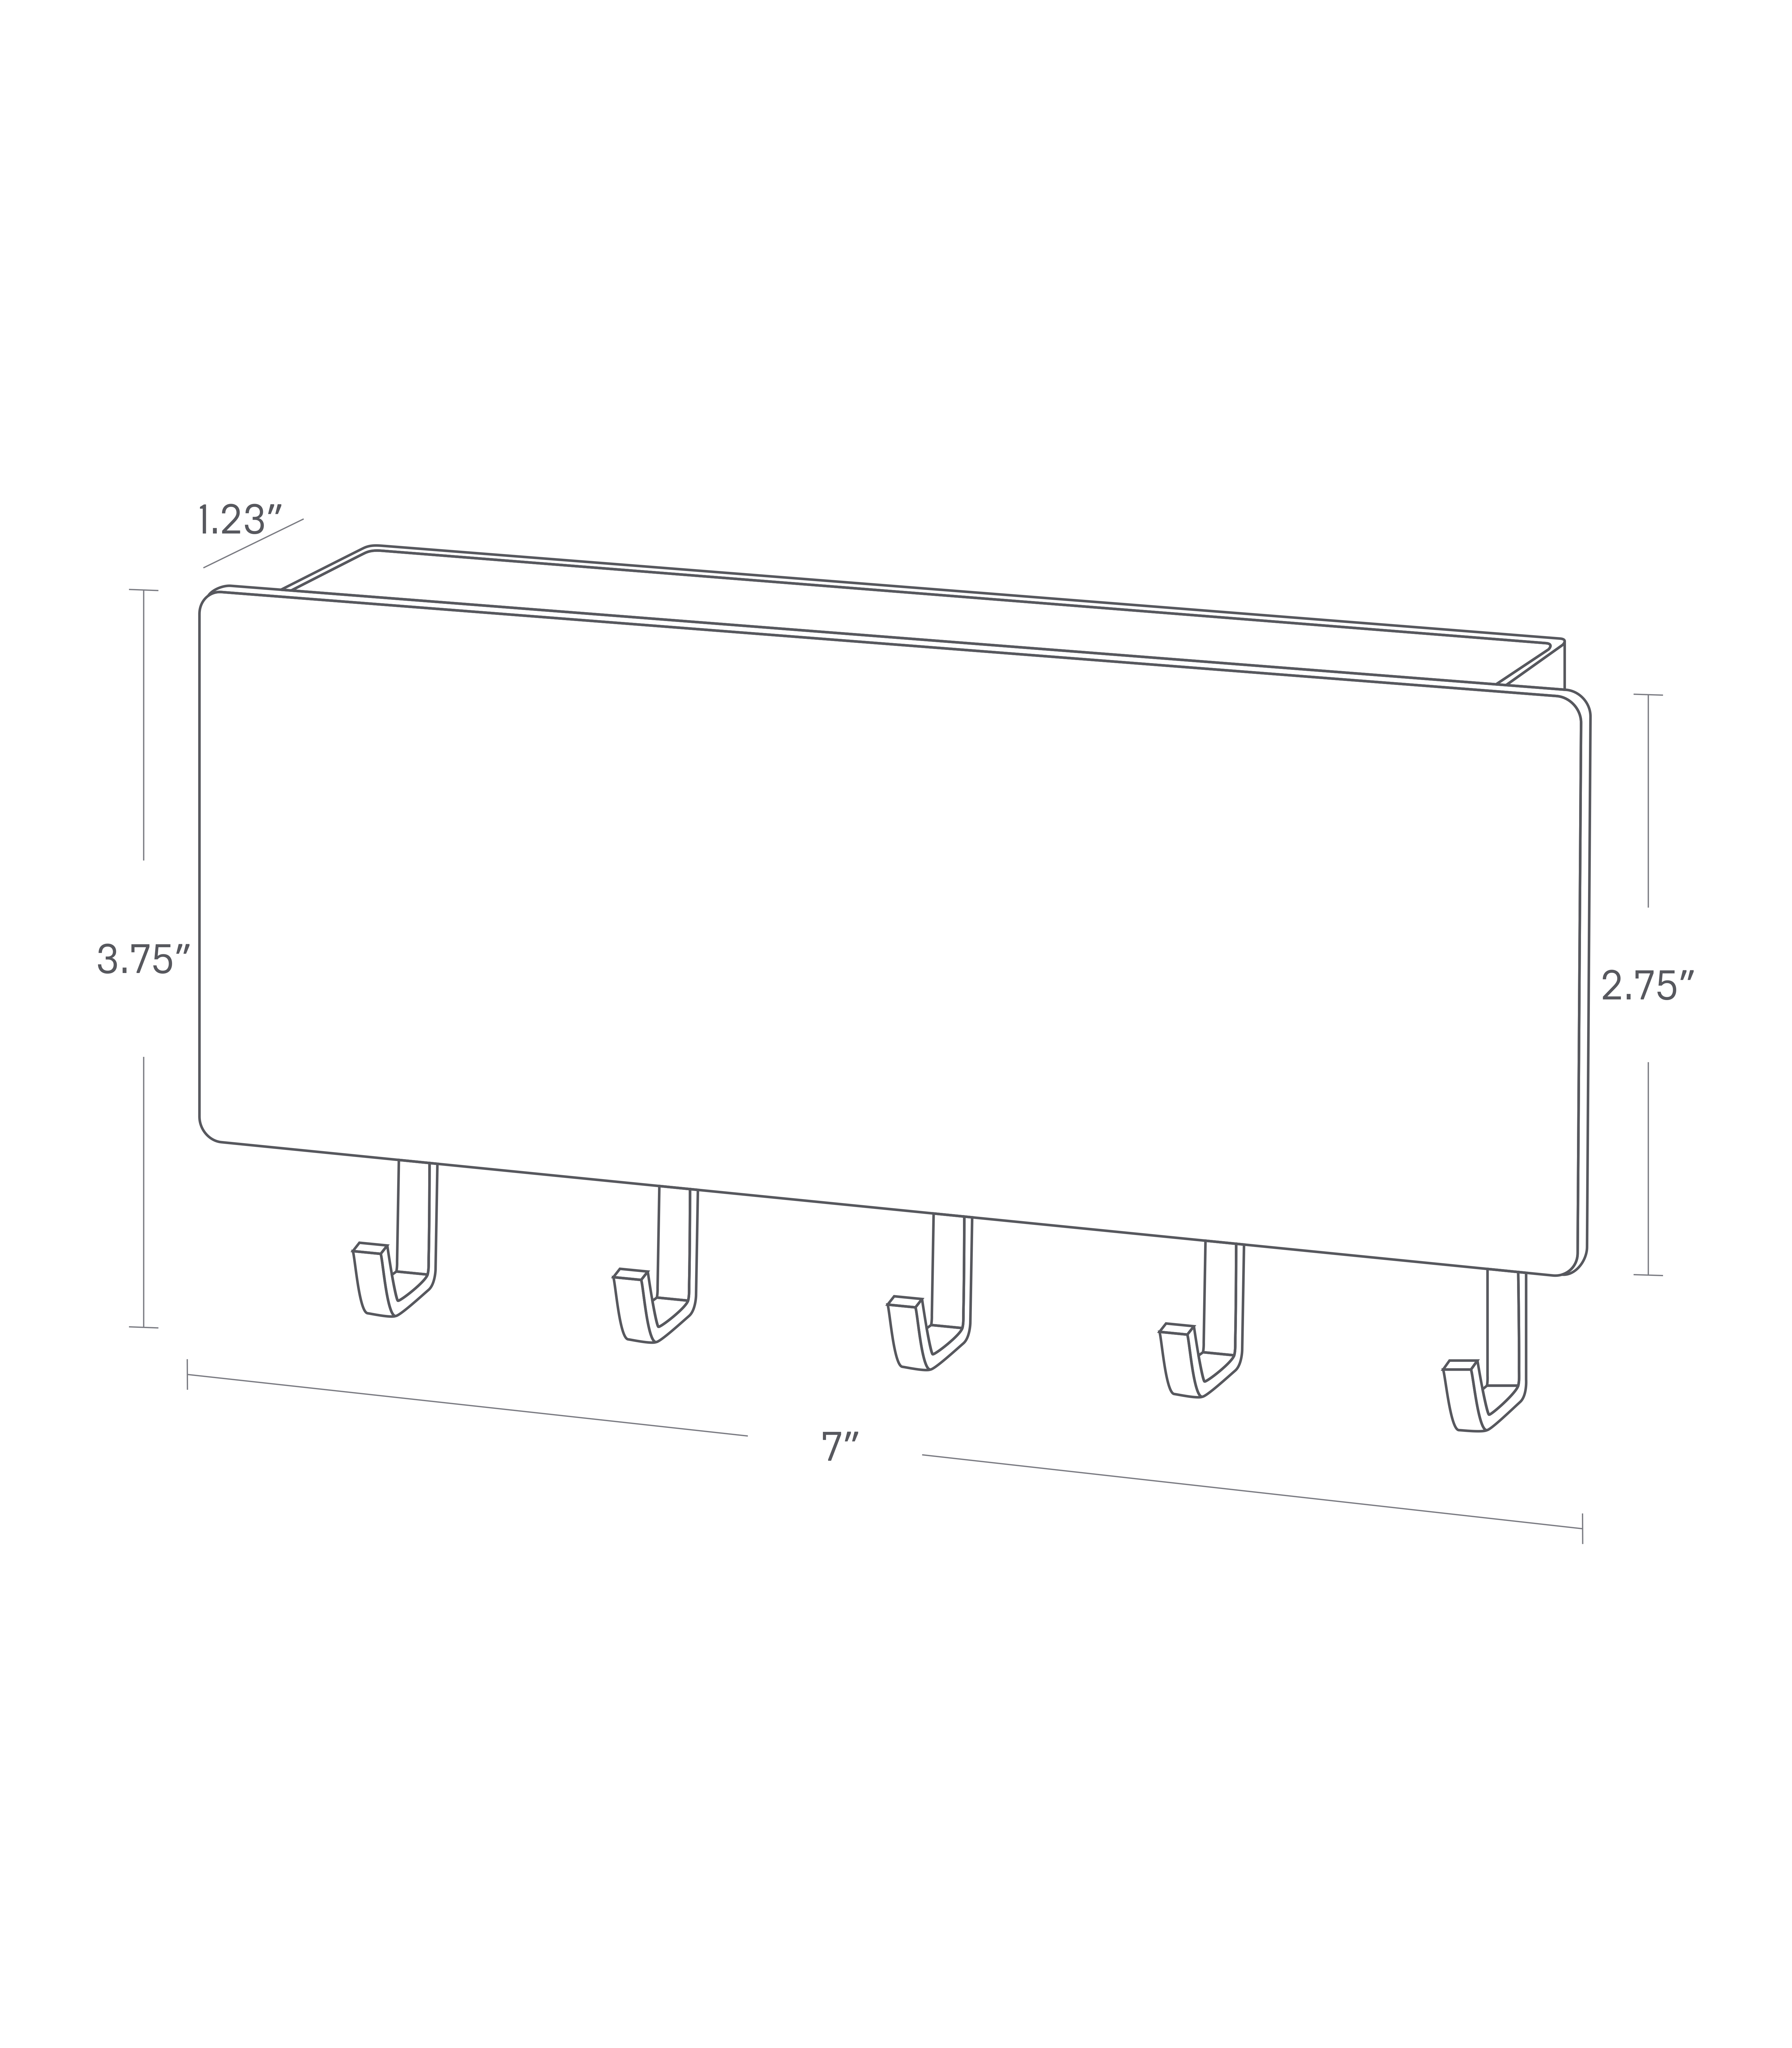 Dimension image for Magnetic Key Rack on a white background with a length of 7'', a width of 2.75'', a depth of 1.23'', and a total height of 7'' including the key hooks